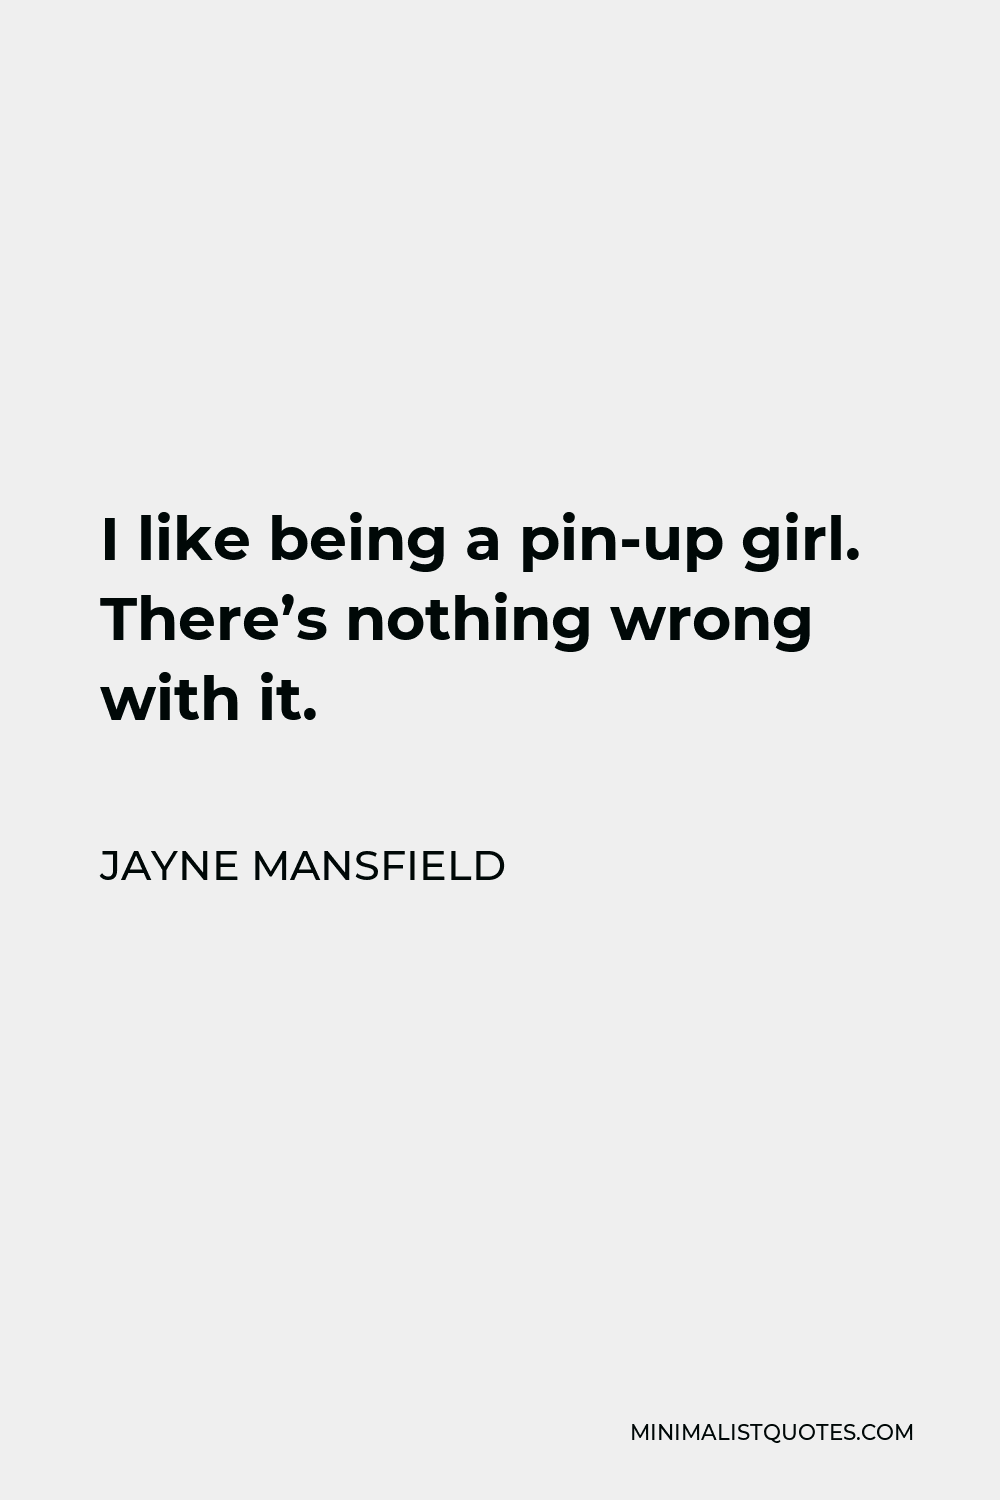 Jayne Mansfield Quote - I like being a pin-up girl. There’s nothing wrong with it.